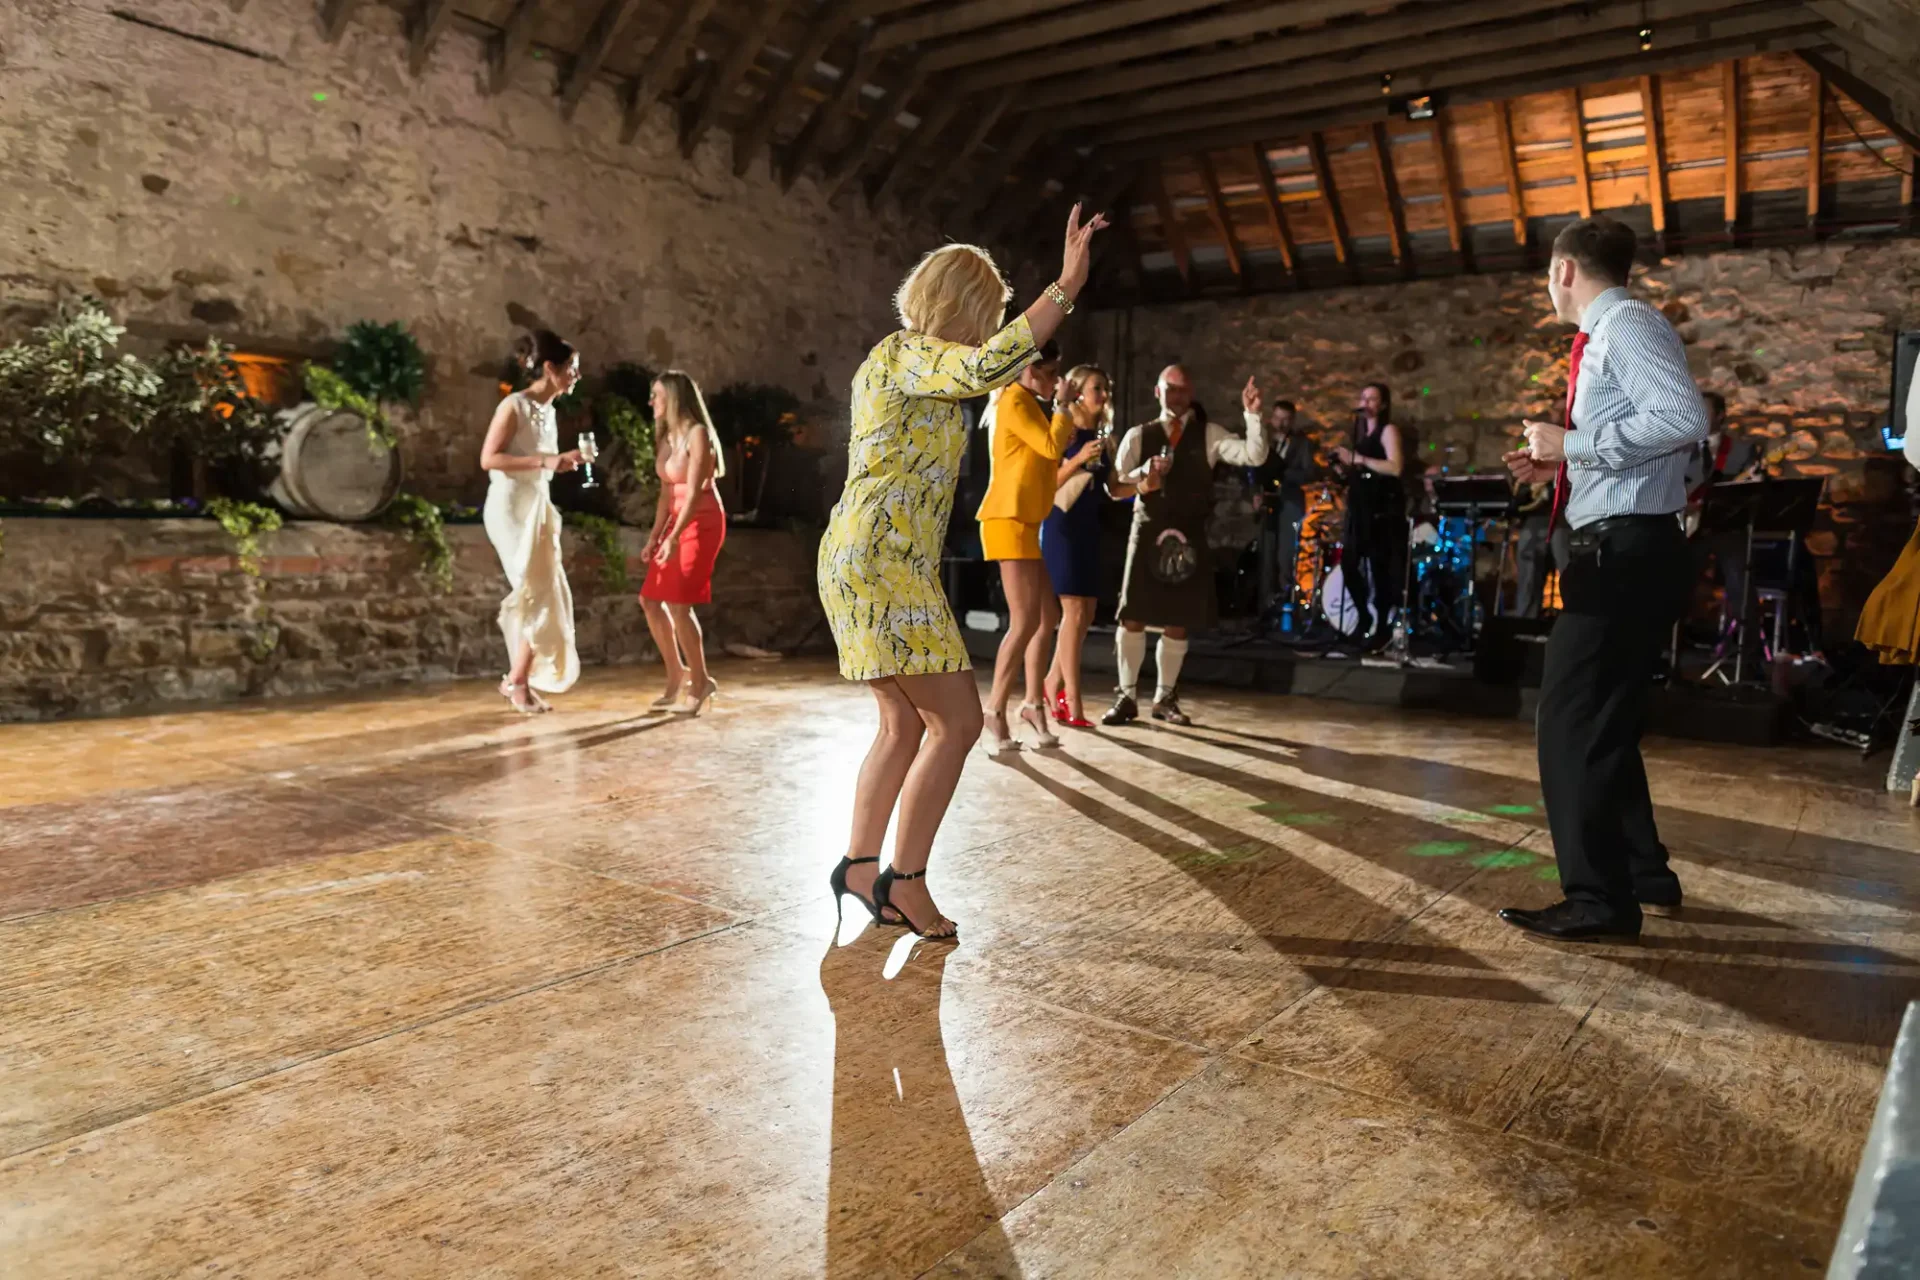 Guests dancing enthusiastically on a wooden floor at an indoor party, with a live band playing in the background.